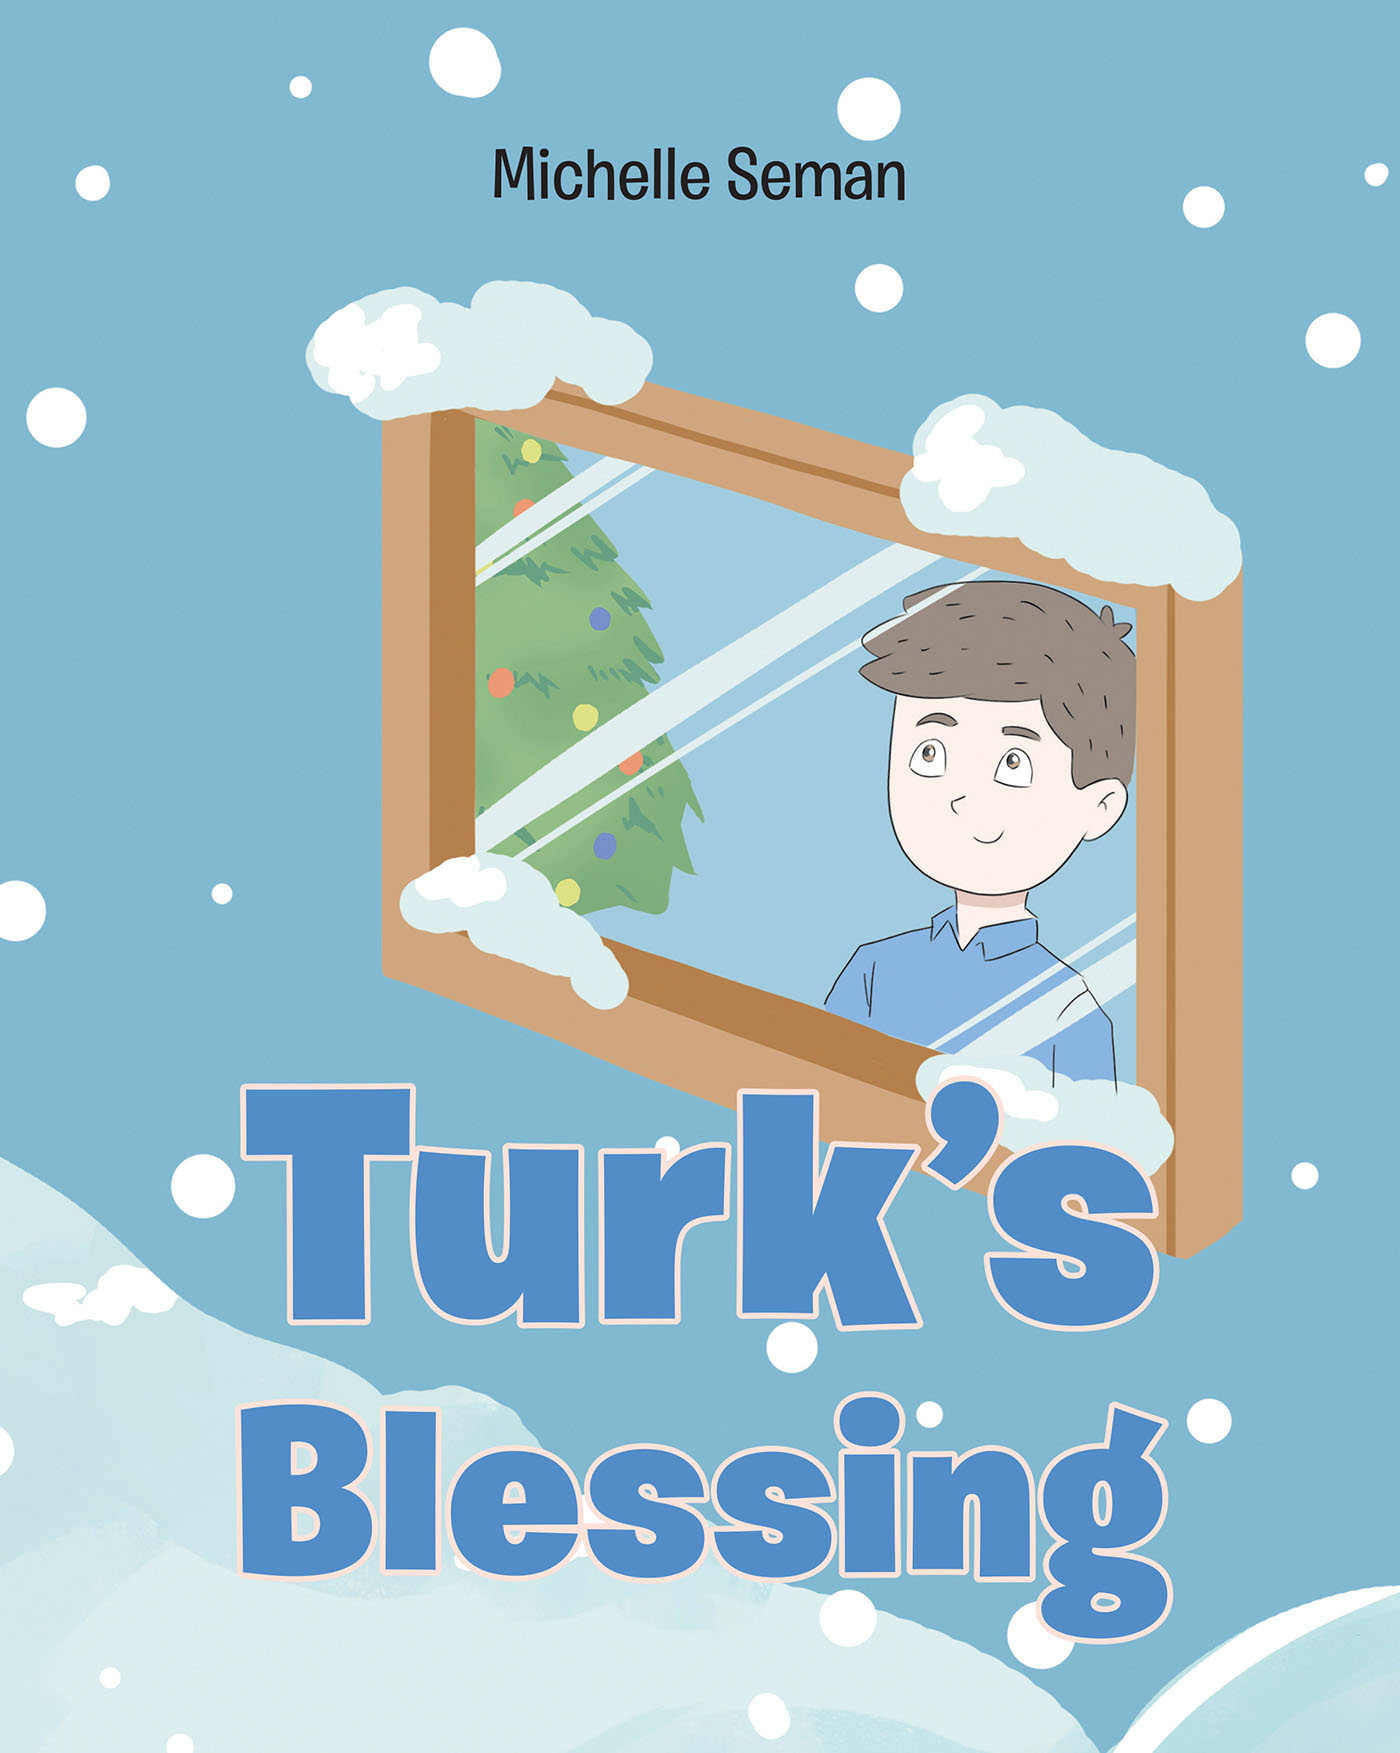 Michelle Seman’s Newly Released "Turk’s Blessing" is a Powerful Story of Connection Between Friends Following a Tragic Loss